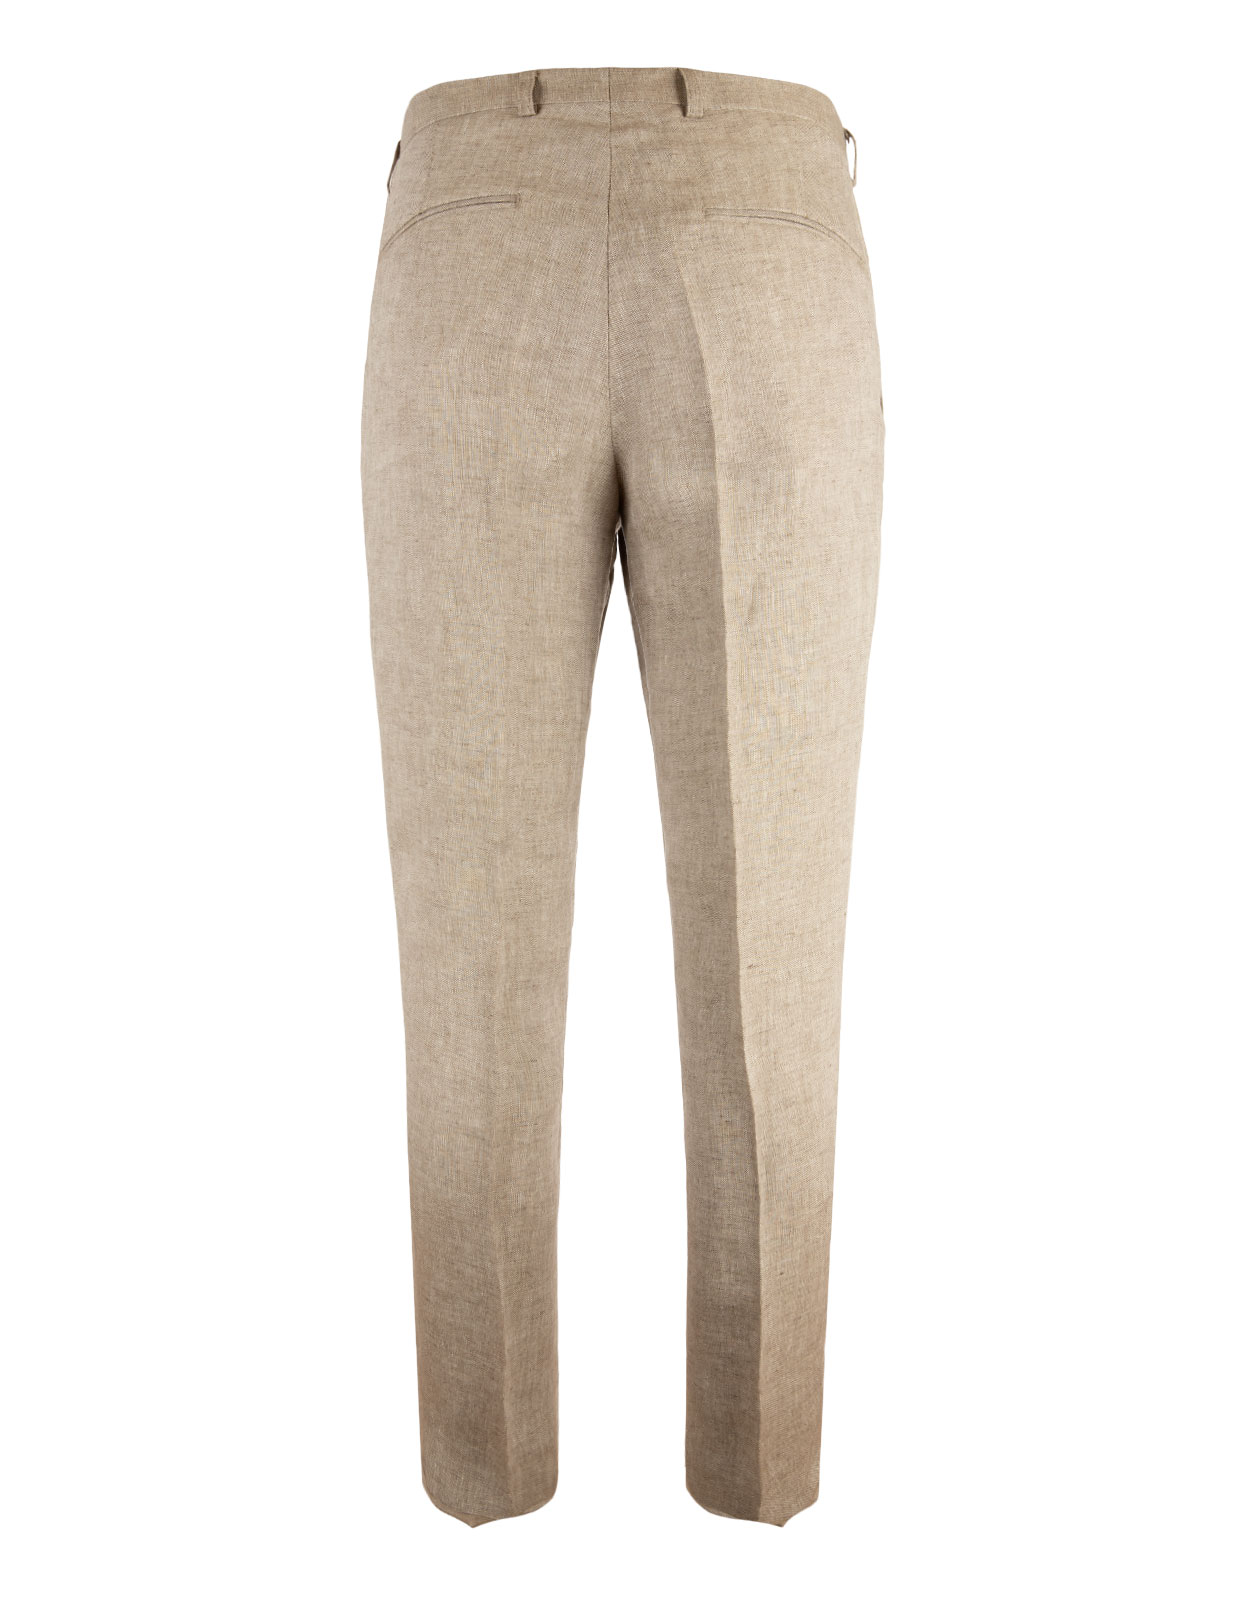 Denz Trousers Trench Beige Stl 48